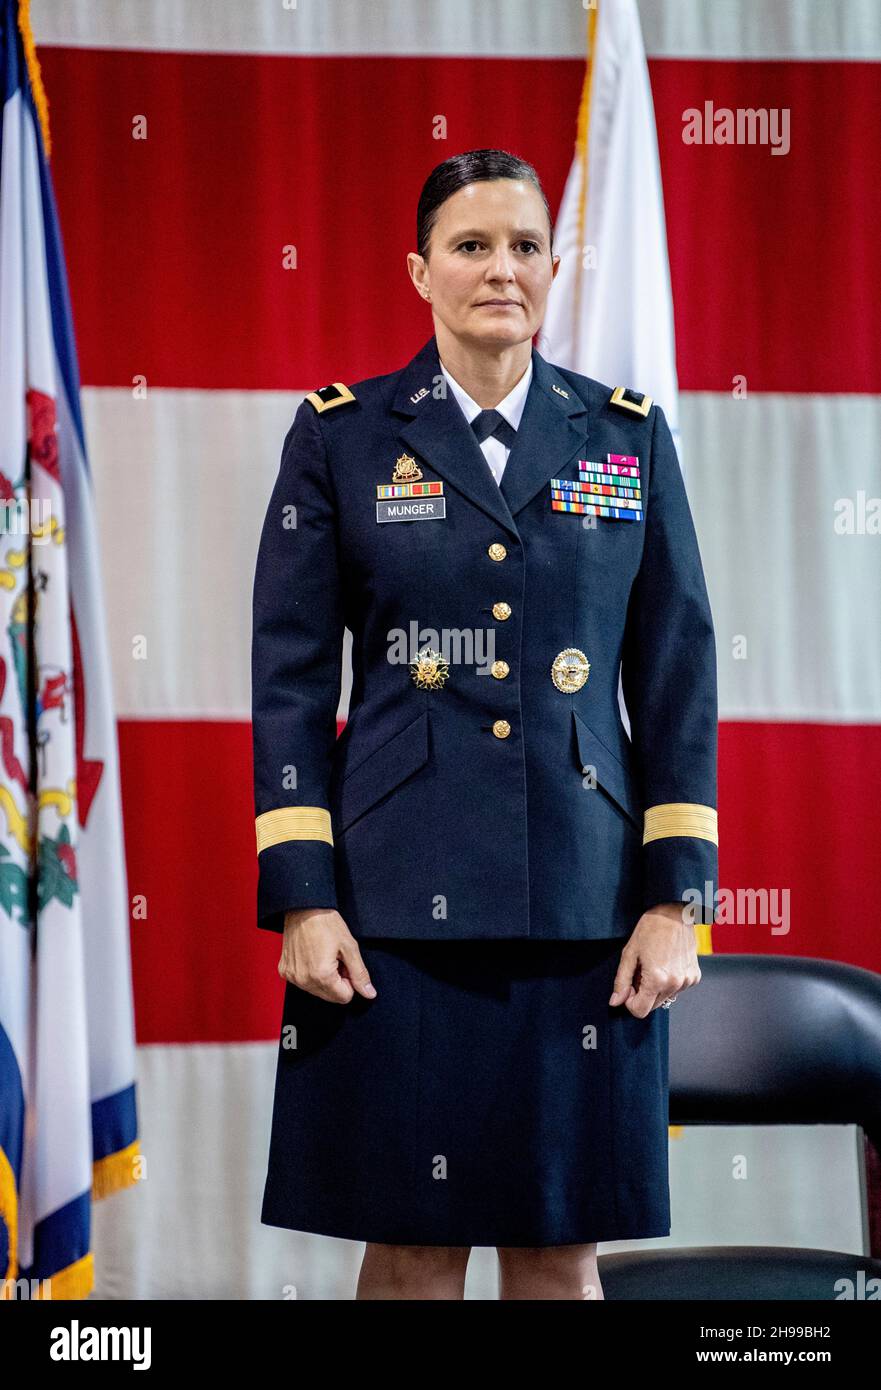 Charleston, United States. 02 December, 2021. West Virginia National Guard Col. Michaelle M. Munger during her promotion to the rank of Brigadier General during a ceremony at Joint Forces Headquarters, December 2, 2021 in Charleston, West Virginia. Munger became the first female general officer in the history of the West Virginia Army National Guard.  Credit: Edwin L. Wriston/DOD/Alamy Live News Stock Photo